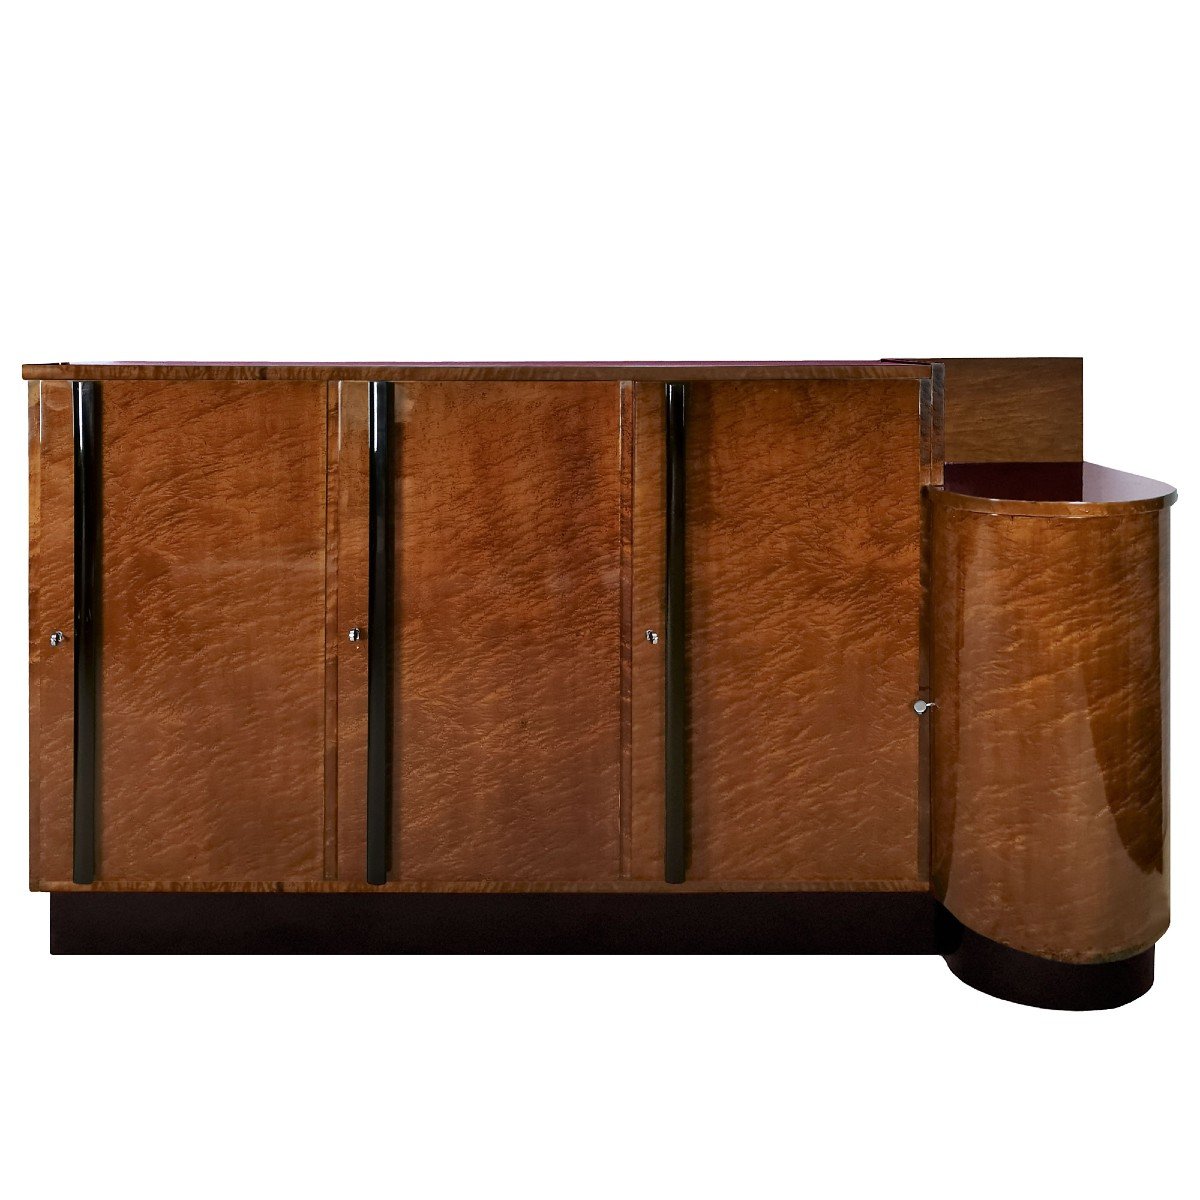 Large Sideboard Cabinet In Speckled Mahogany Veneered Wood - Italy 1930